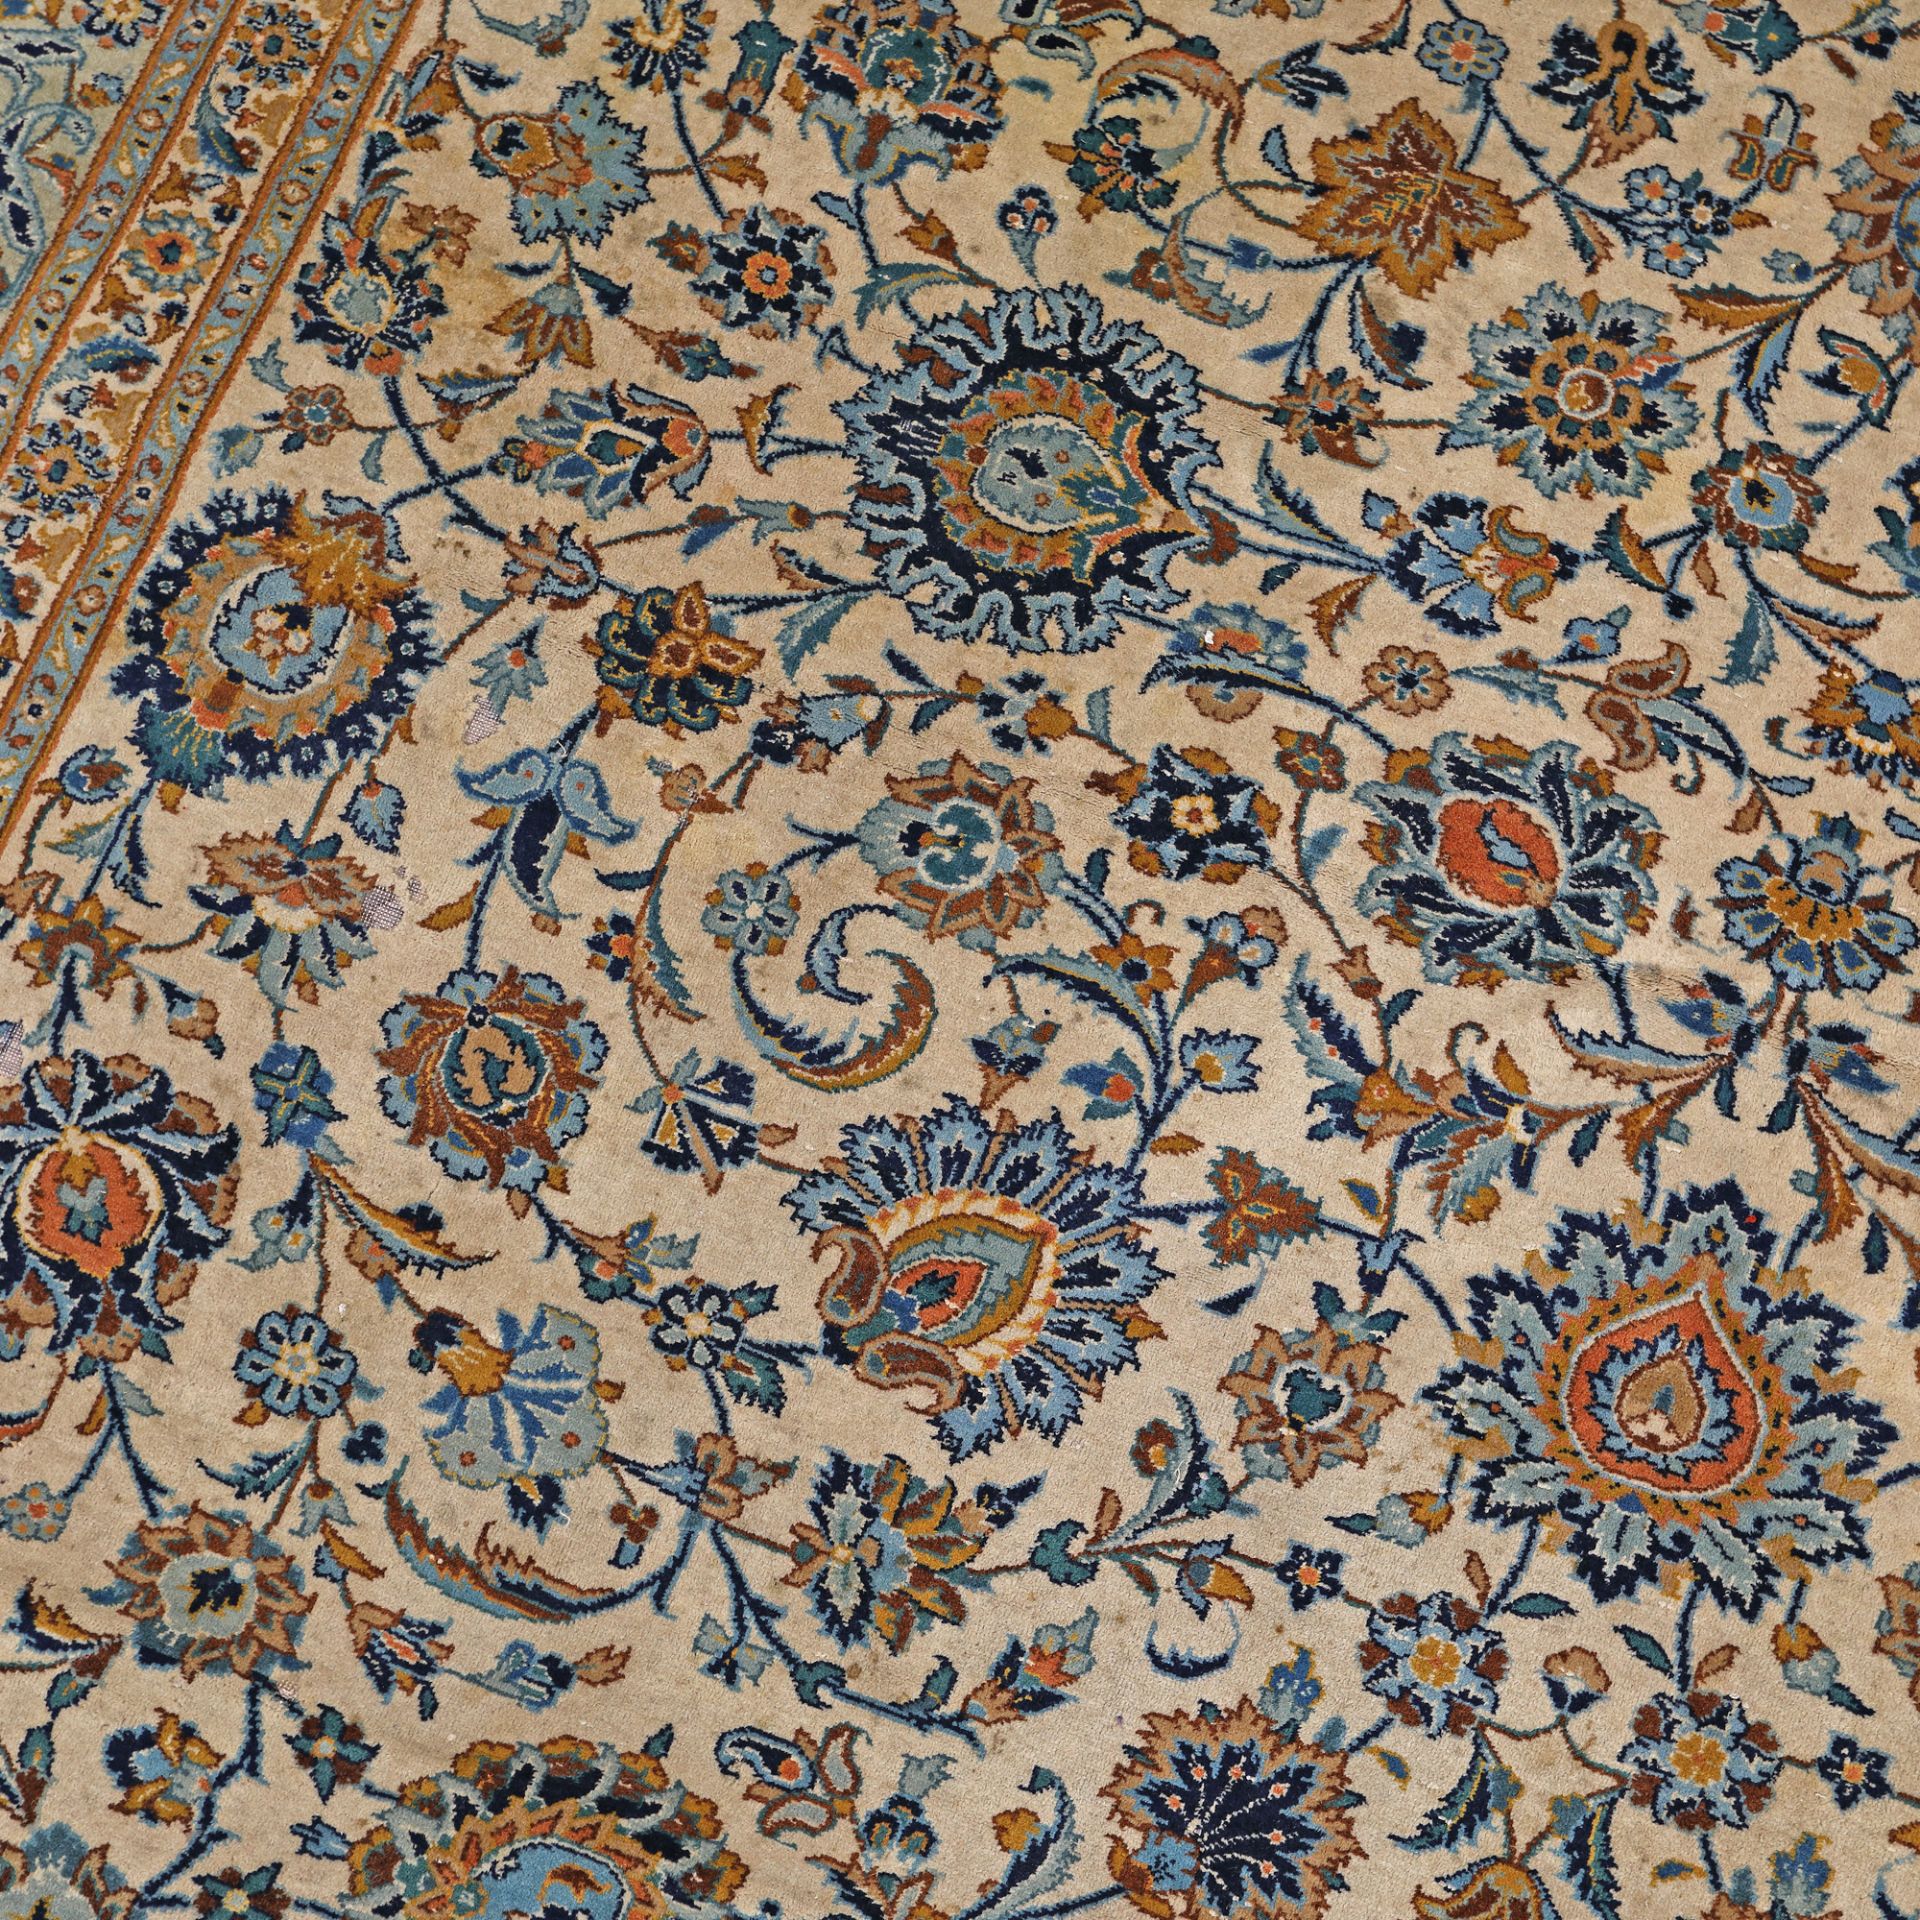 Kashan wool rug, decorated with rosette and floral motifs, Iran - Image 2 of 3